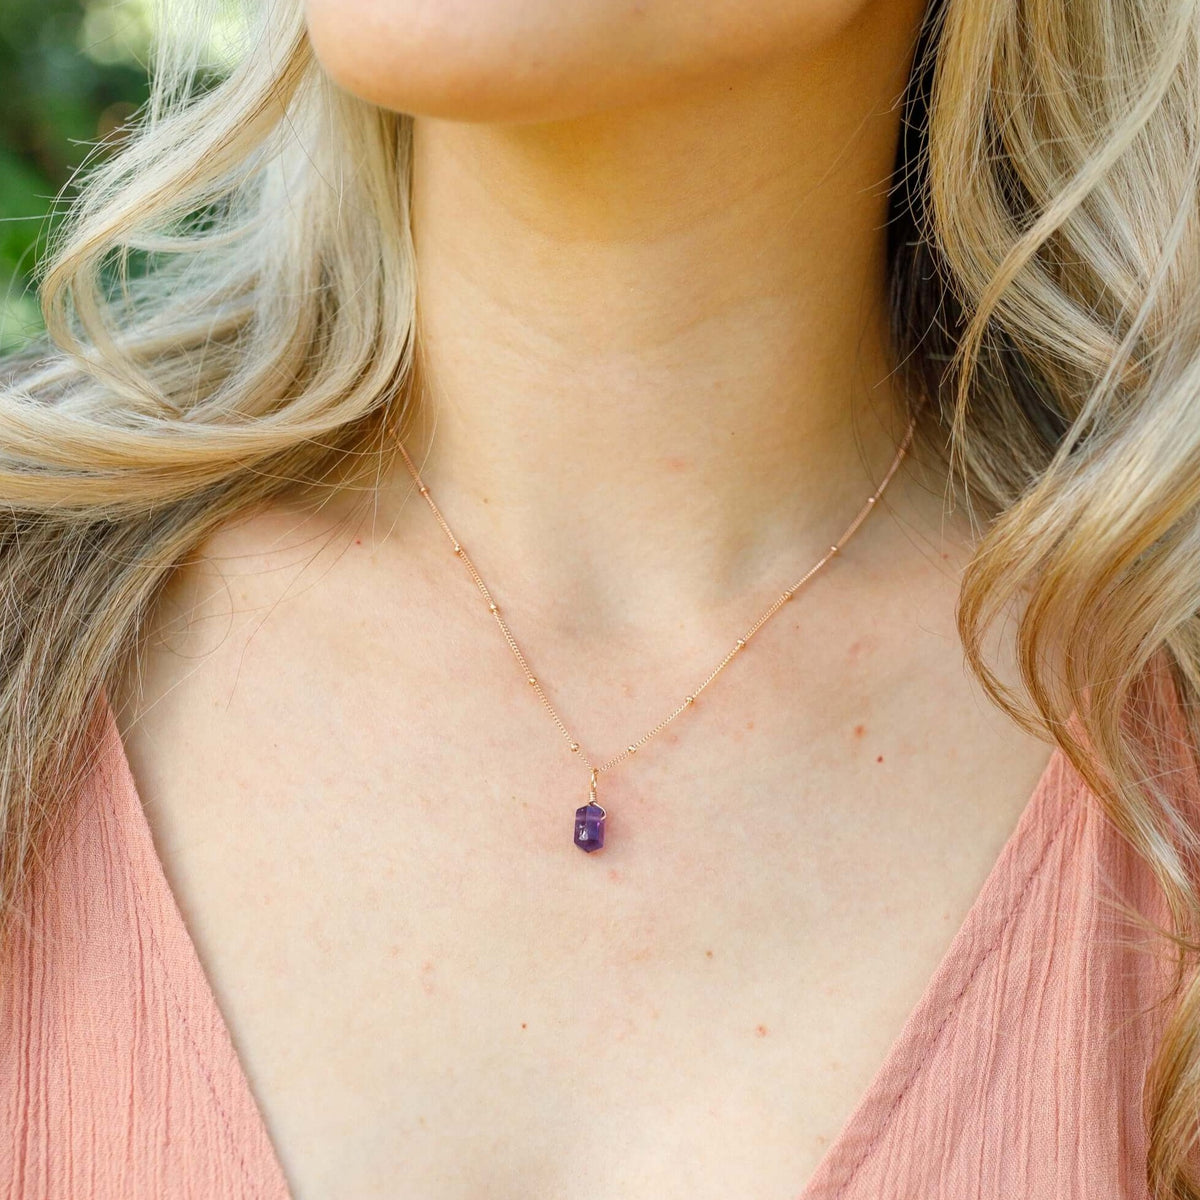 Double Terminated Crystal Pendant Necklace - Amethyst - 14K Rose Gold Fill Satellite - Luna Tide Handmade Jewellery